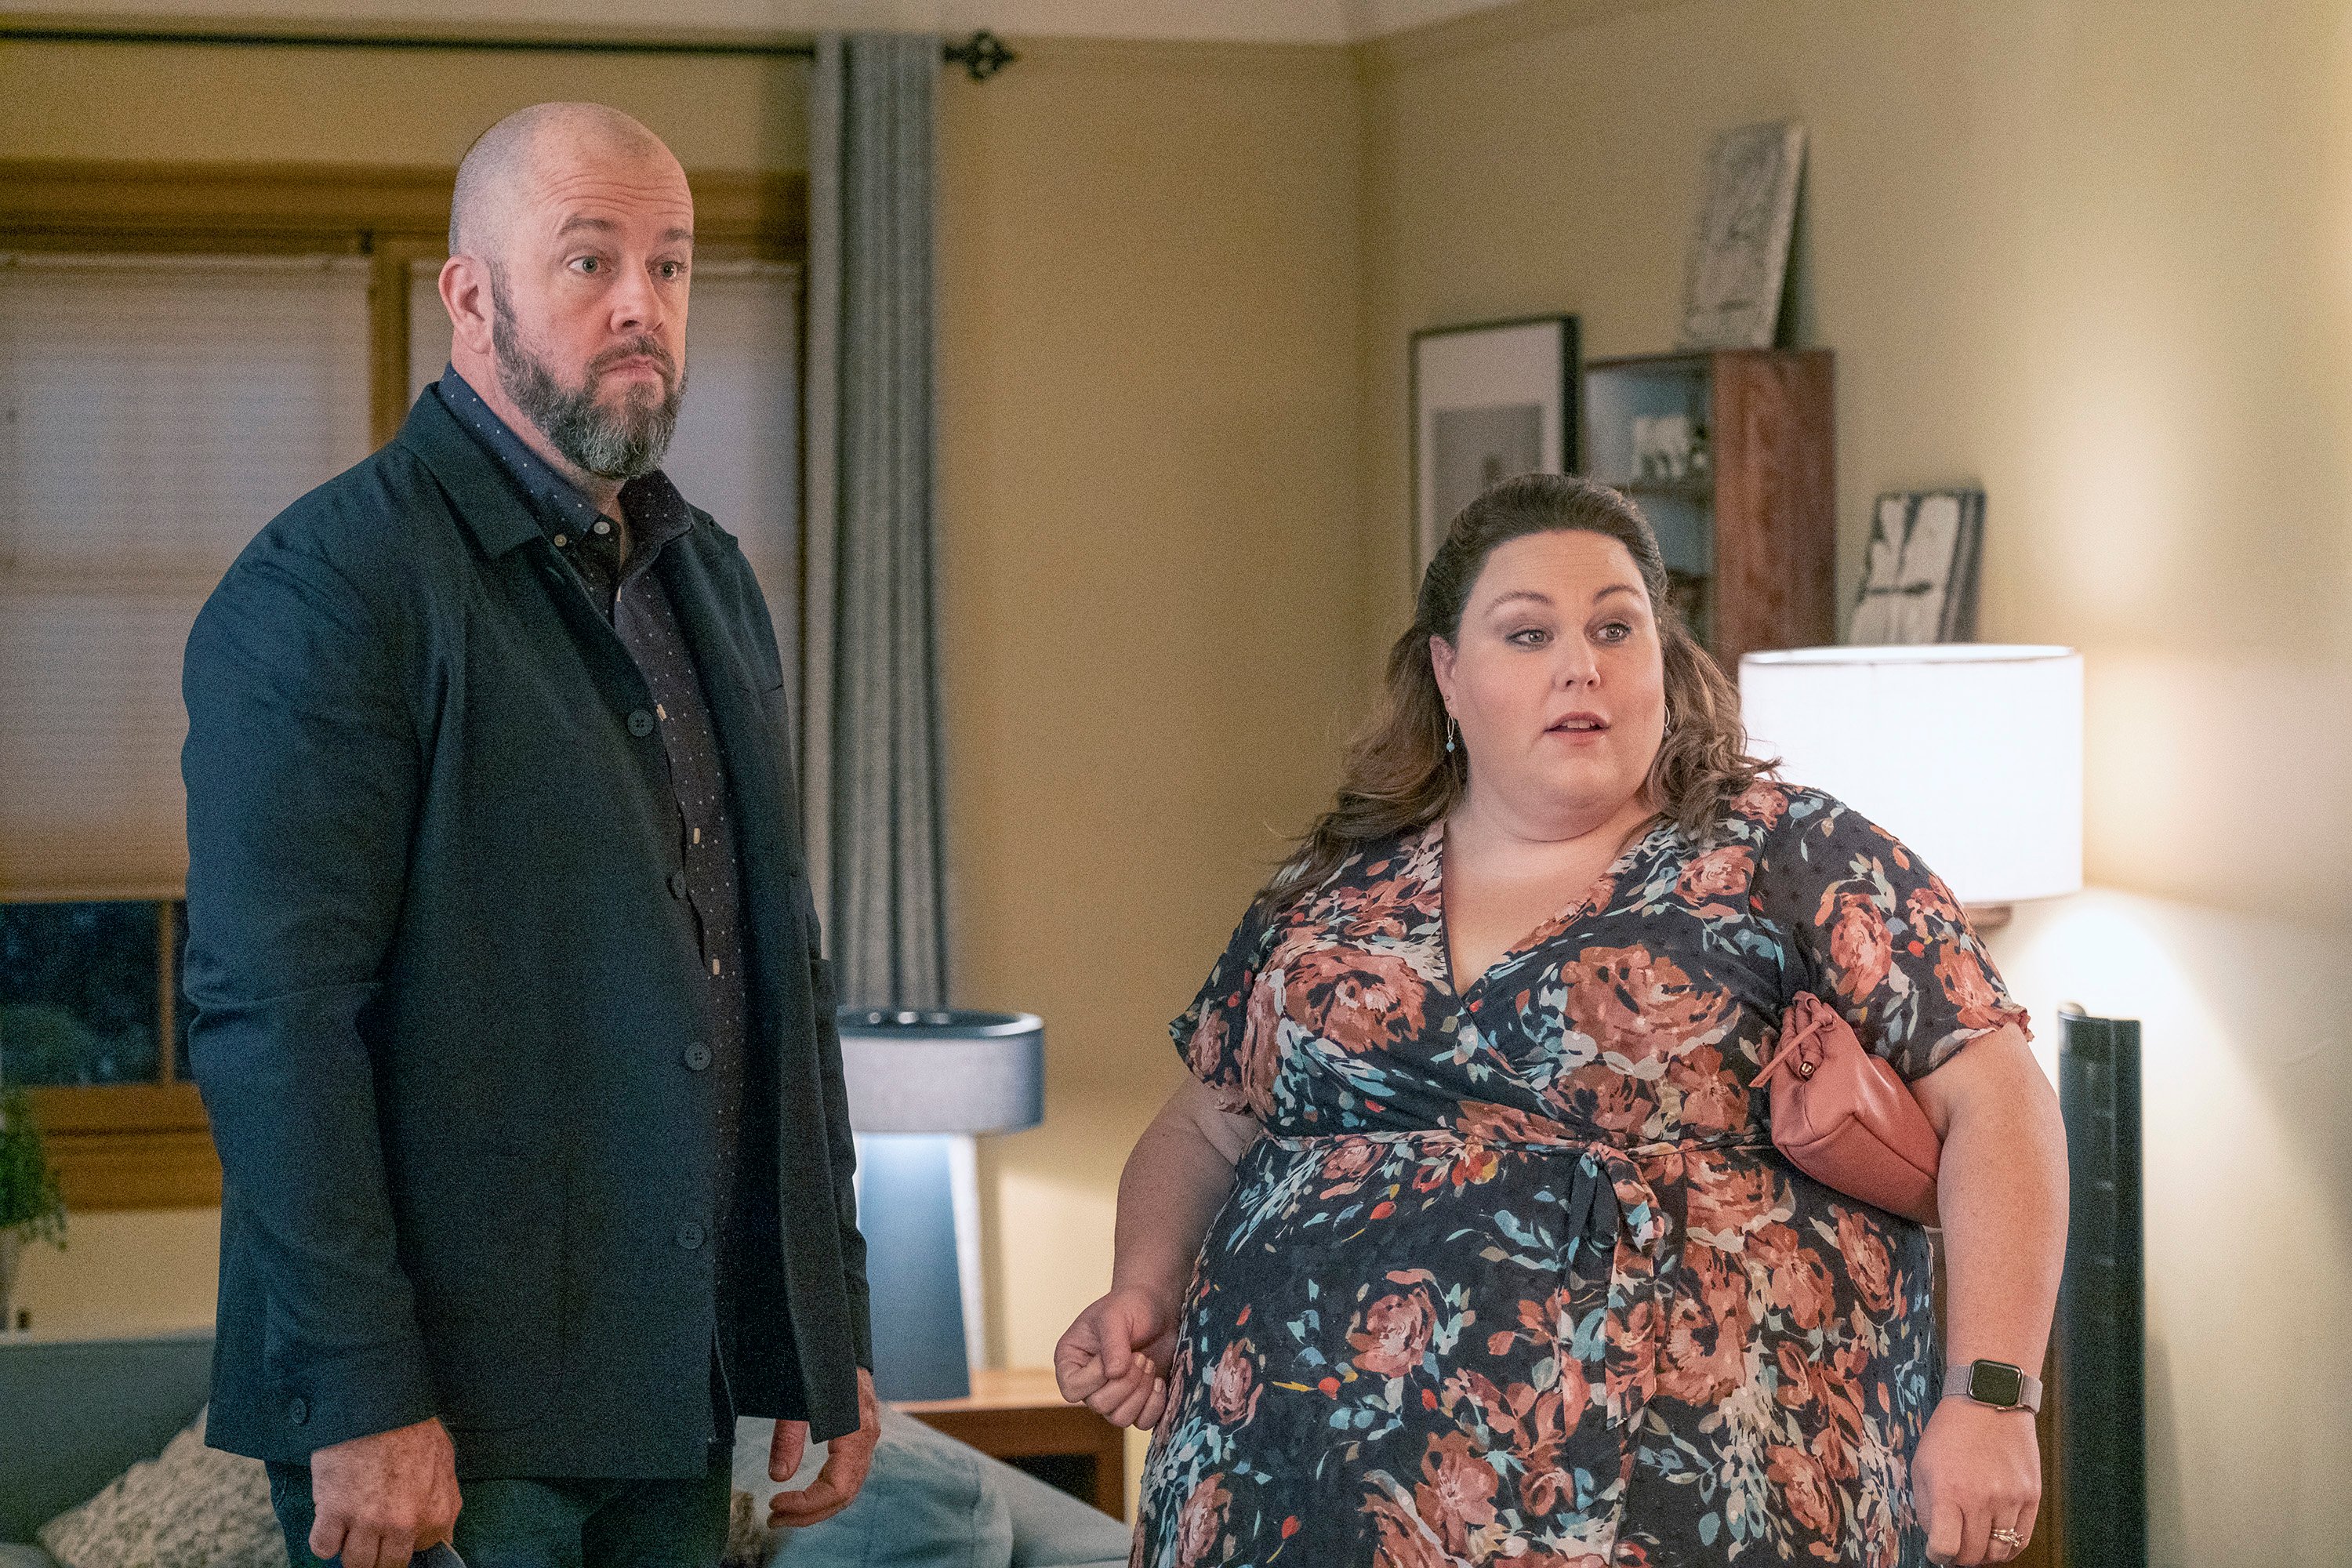 Chris Sullivan and Chrissy Metz, who play Toby and Kate in 'This Is Us' Season 6 Episode 9, share a scene. Toby wears a black jacket over a dark blue button-up shirt with white polka dots and jeans. Kate wears a dark blue short-sleeved dress with dark pink roses on it.